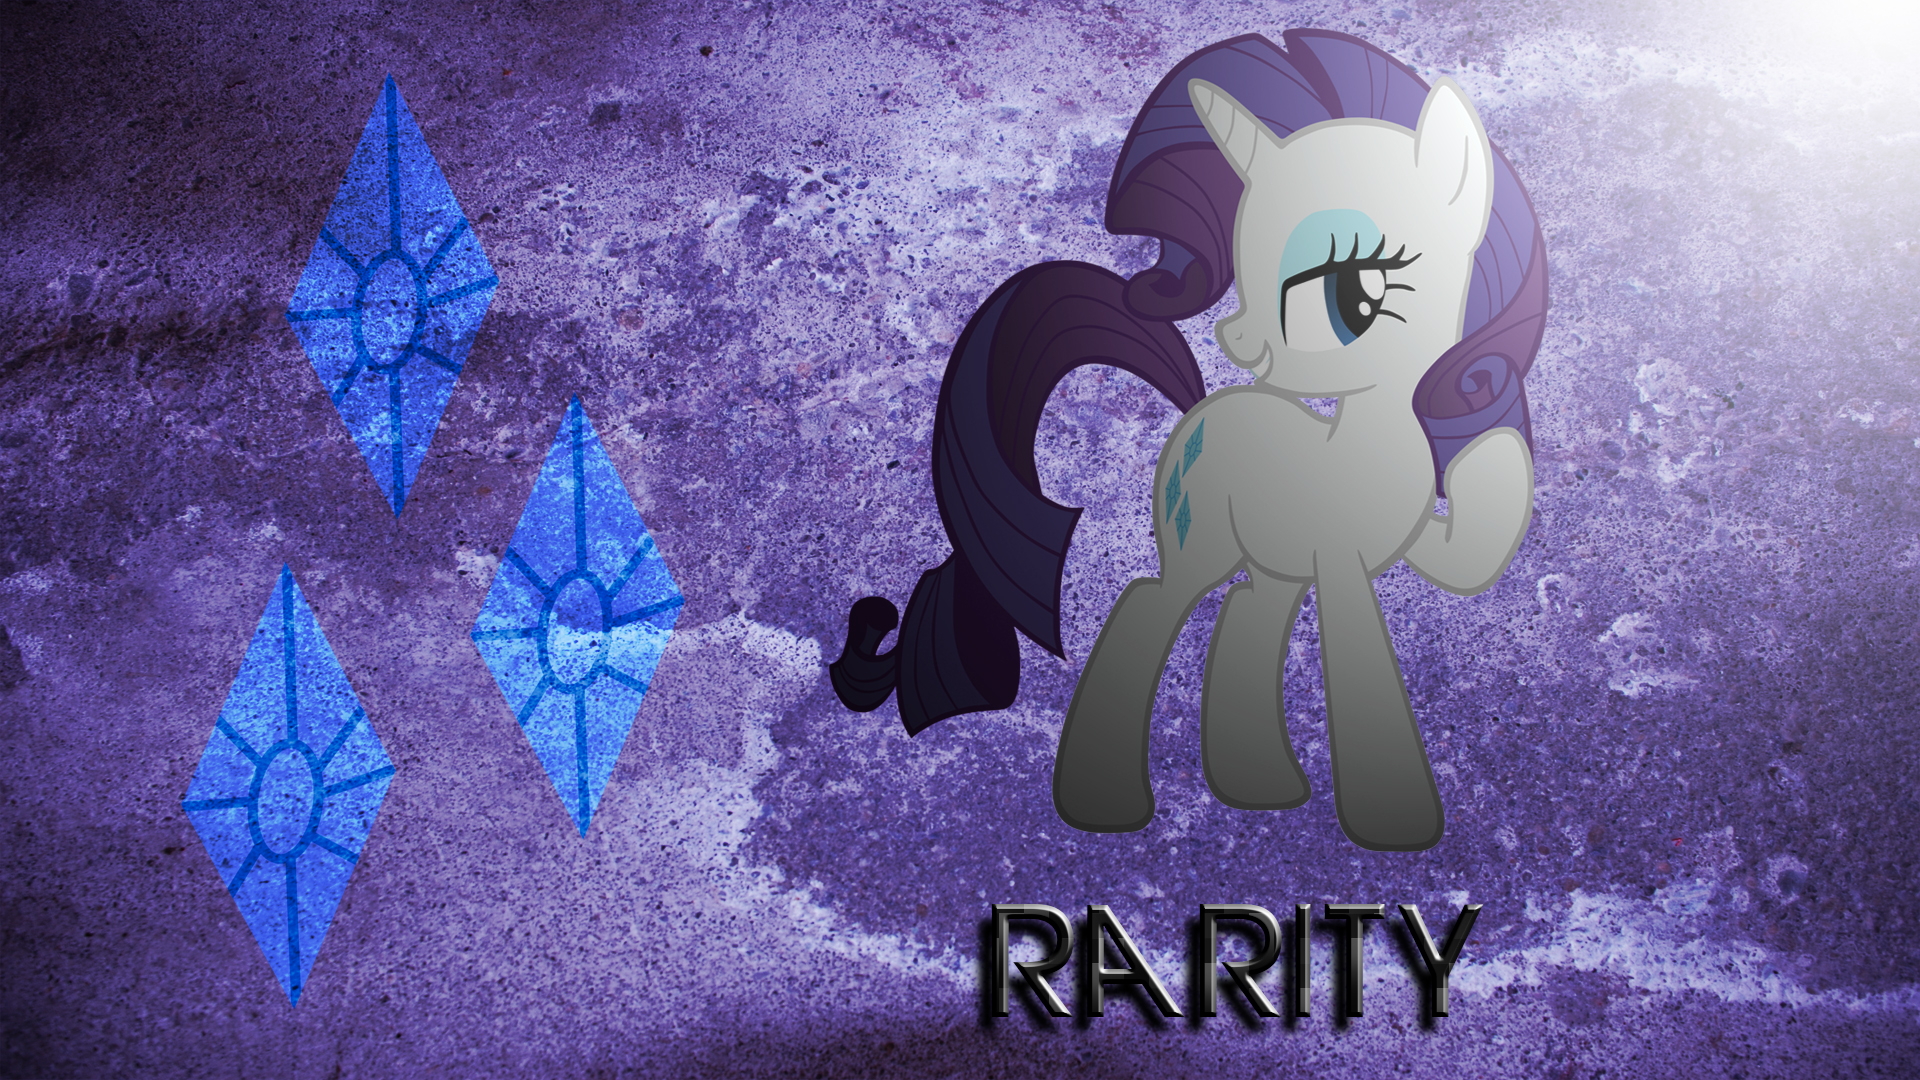 Rarity fabulous by BlackGryph0n, BronyYAY123 and TheJourneysEnd